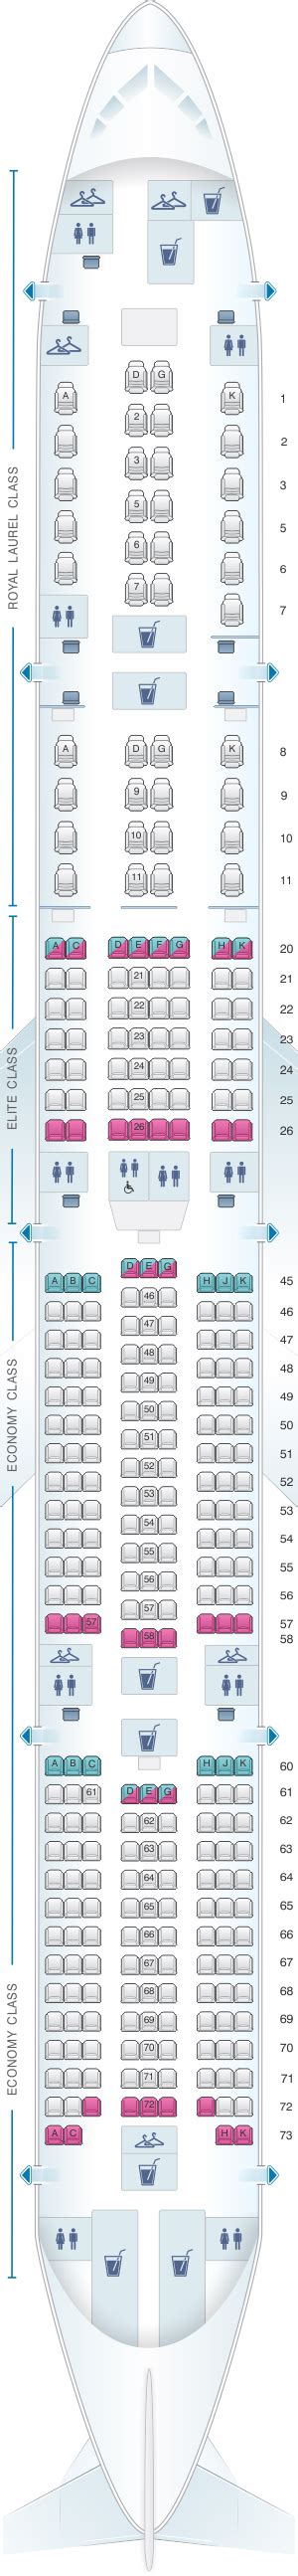 Seat selection is open until 12 hours before your scheduled flight departure. You can also check in online between 48 hours to 1 hour before departure. If you are flying Royal Laurel, Premium Laurel, Business Class, or Premium Economy Class, Main-meal Selections can be made no earlier than 21 days and no later than 24 hours prior to departure .... 